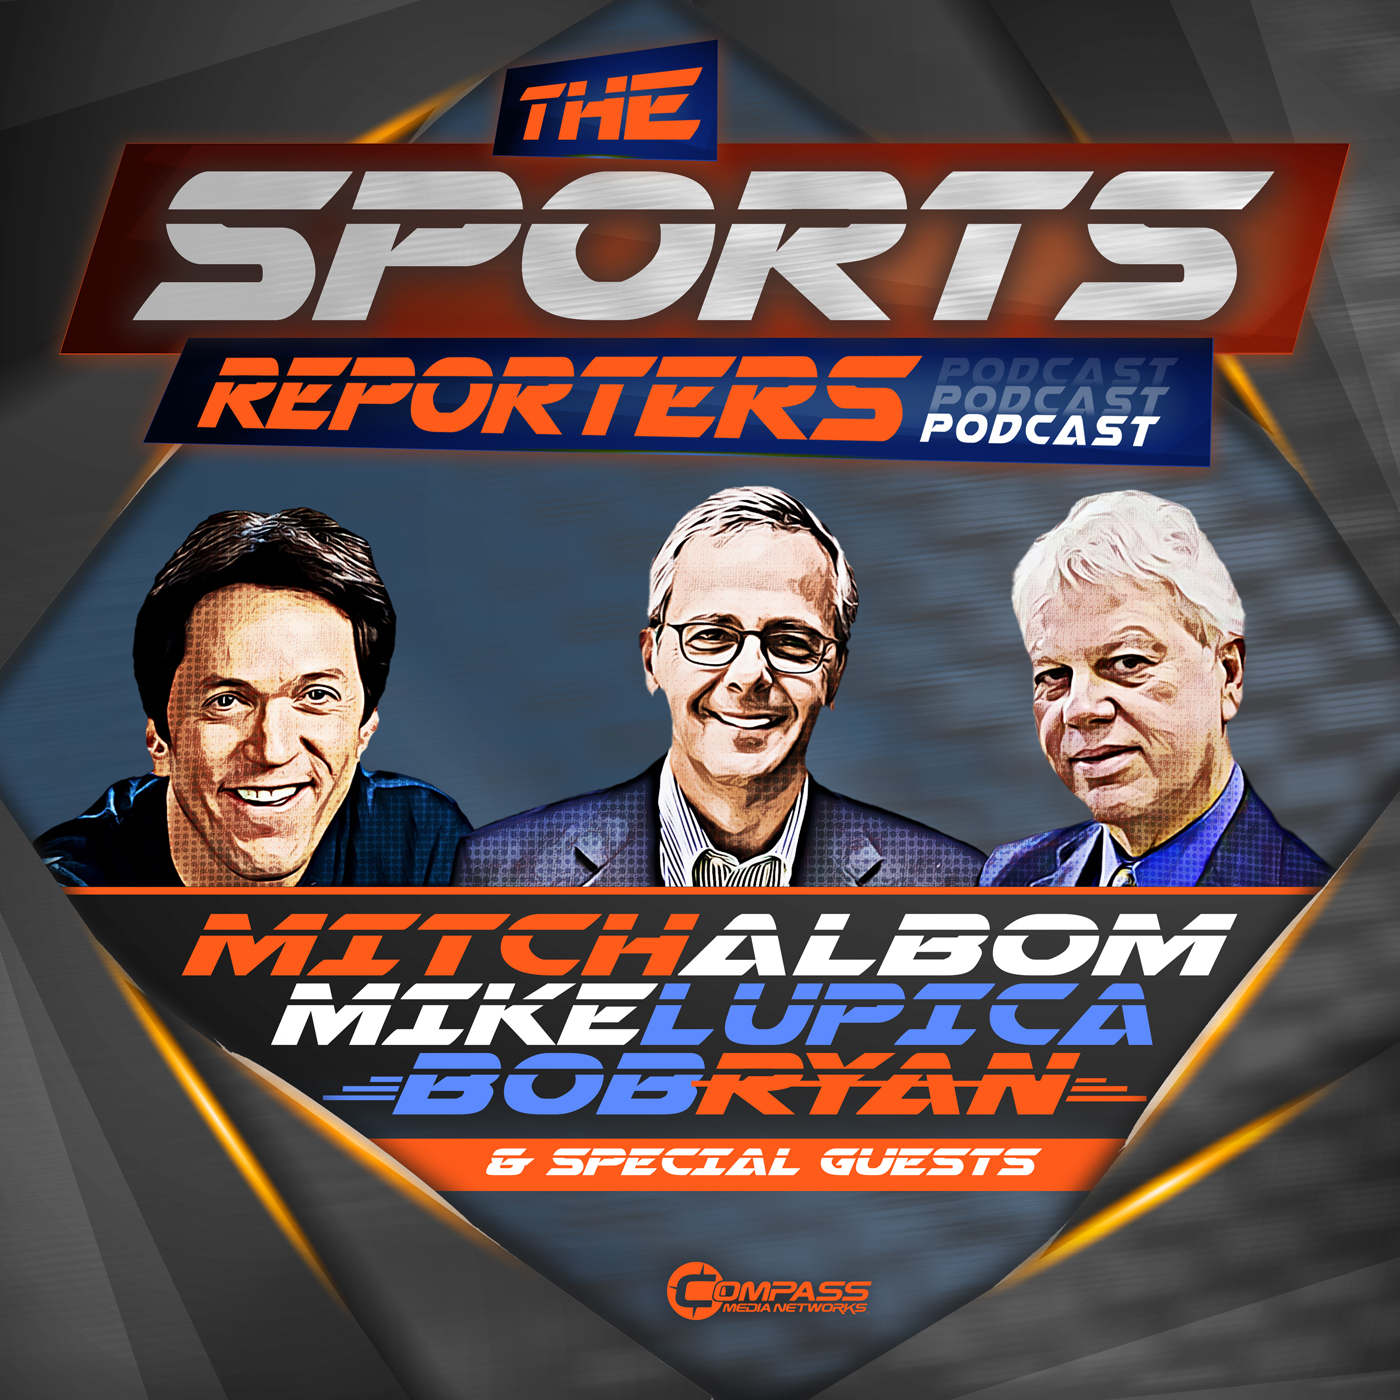 The Sports Reporters - Episode 210 - What to watch for in NFL Week 1. College Football. And a US Open Tennis update